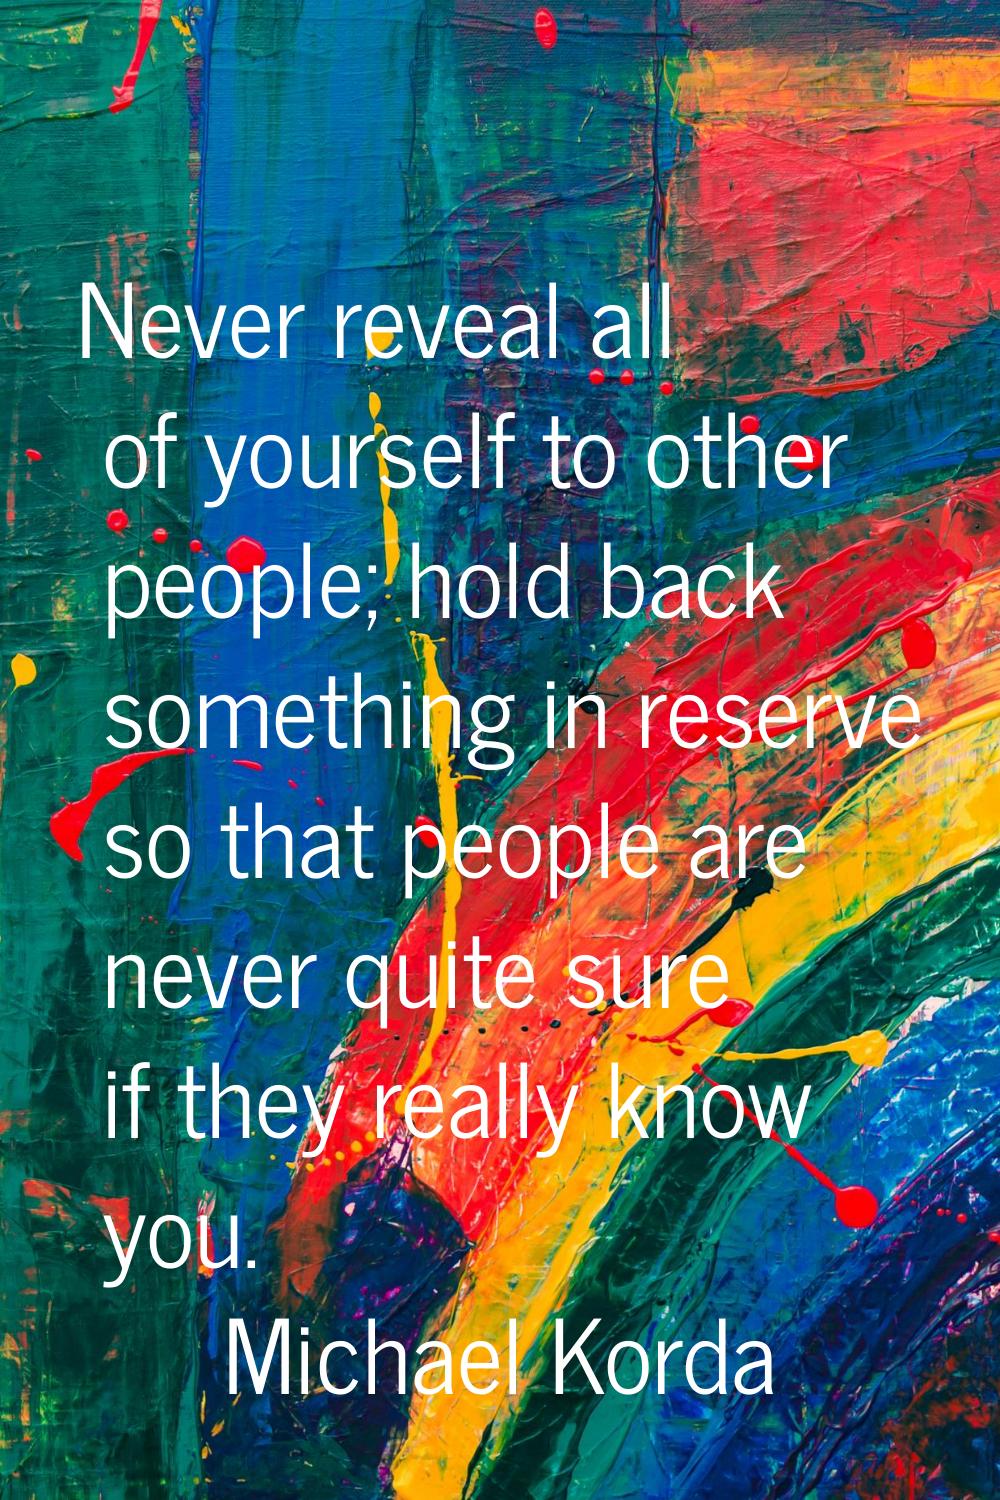 Never reveal all of yourself to other people; hold back something in reserve so that people are nev